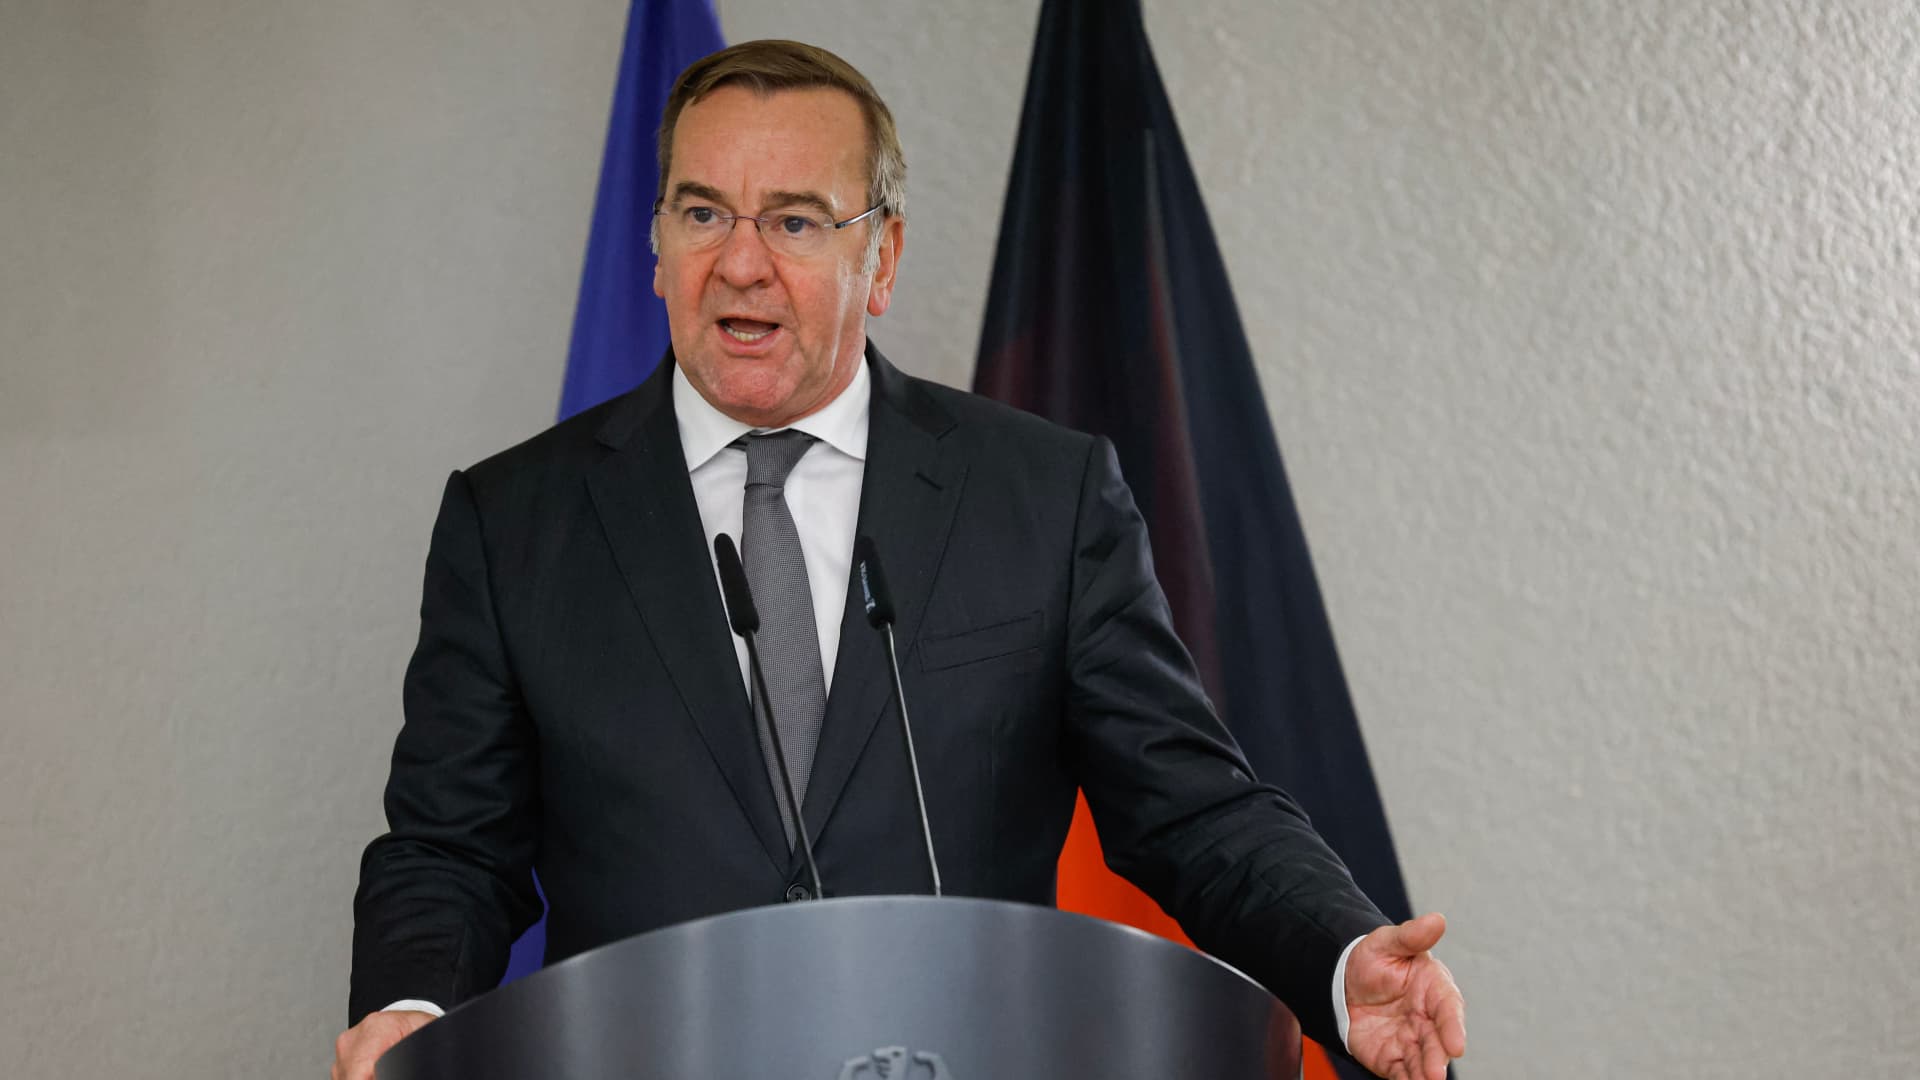 Germany’s defense minister says NATO’s 2% target is just the start: ‘We’ll probably need more’